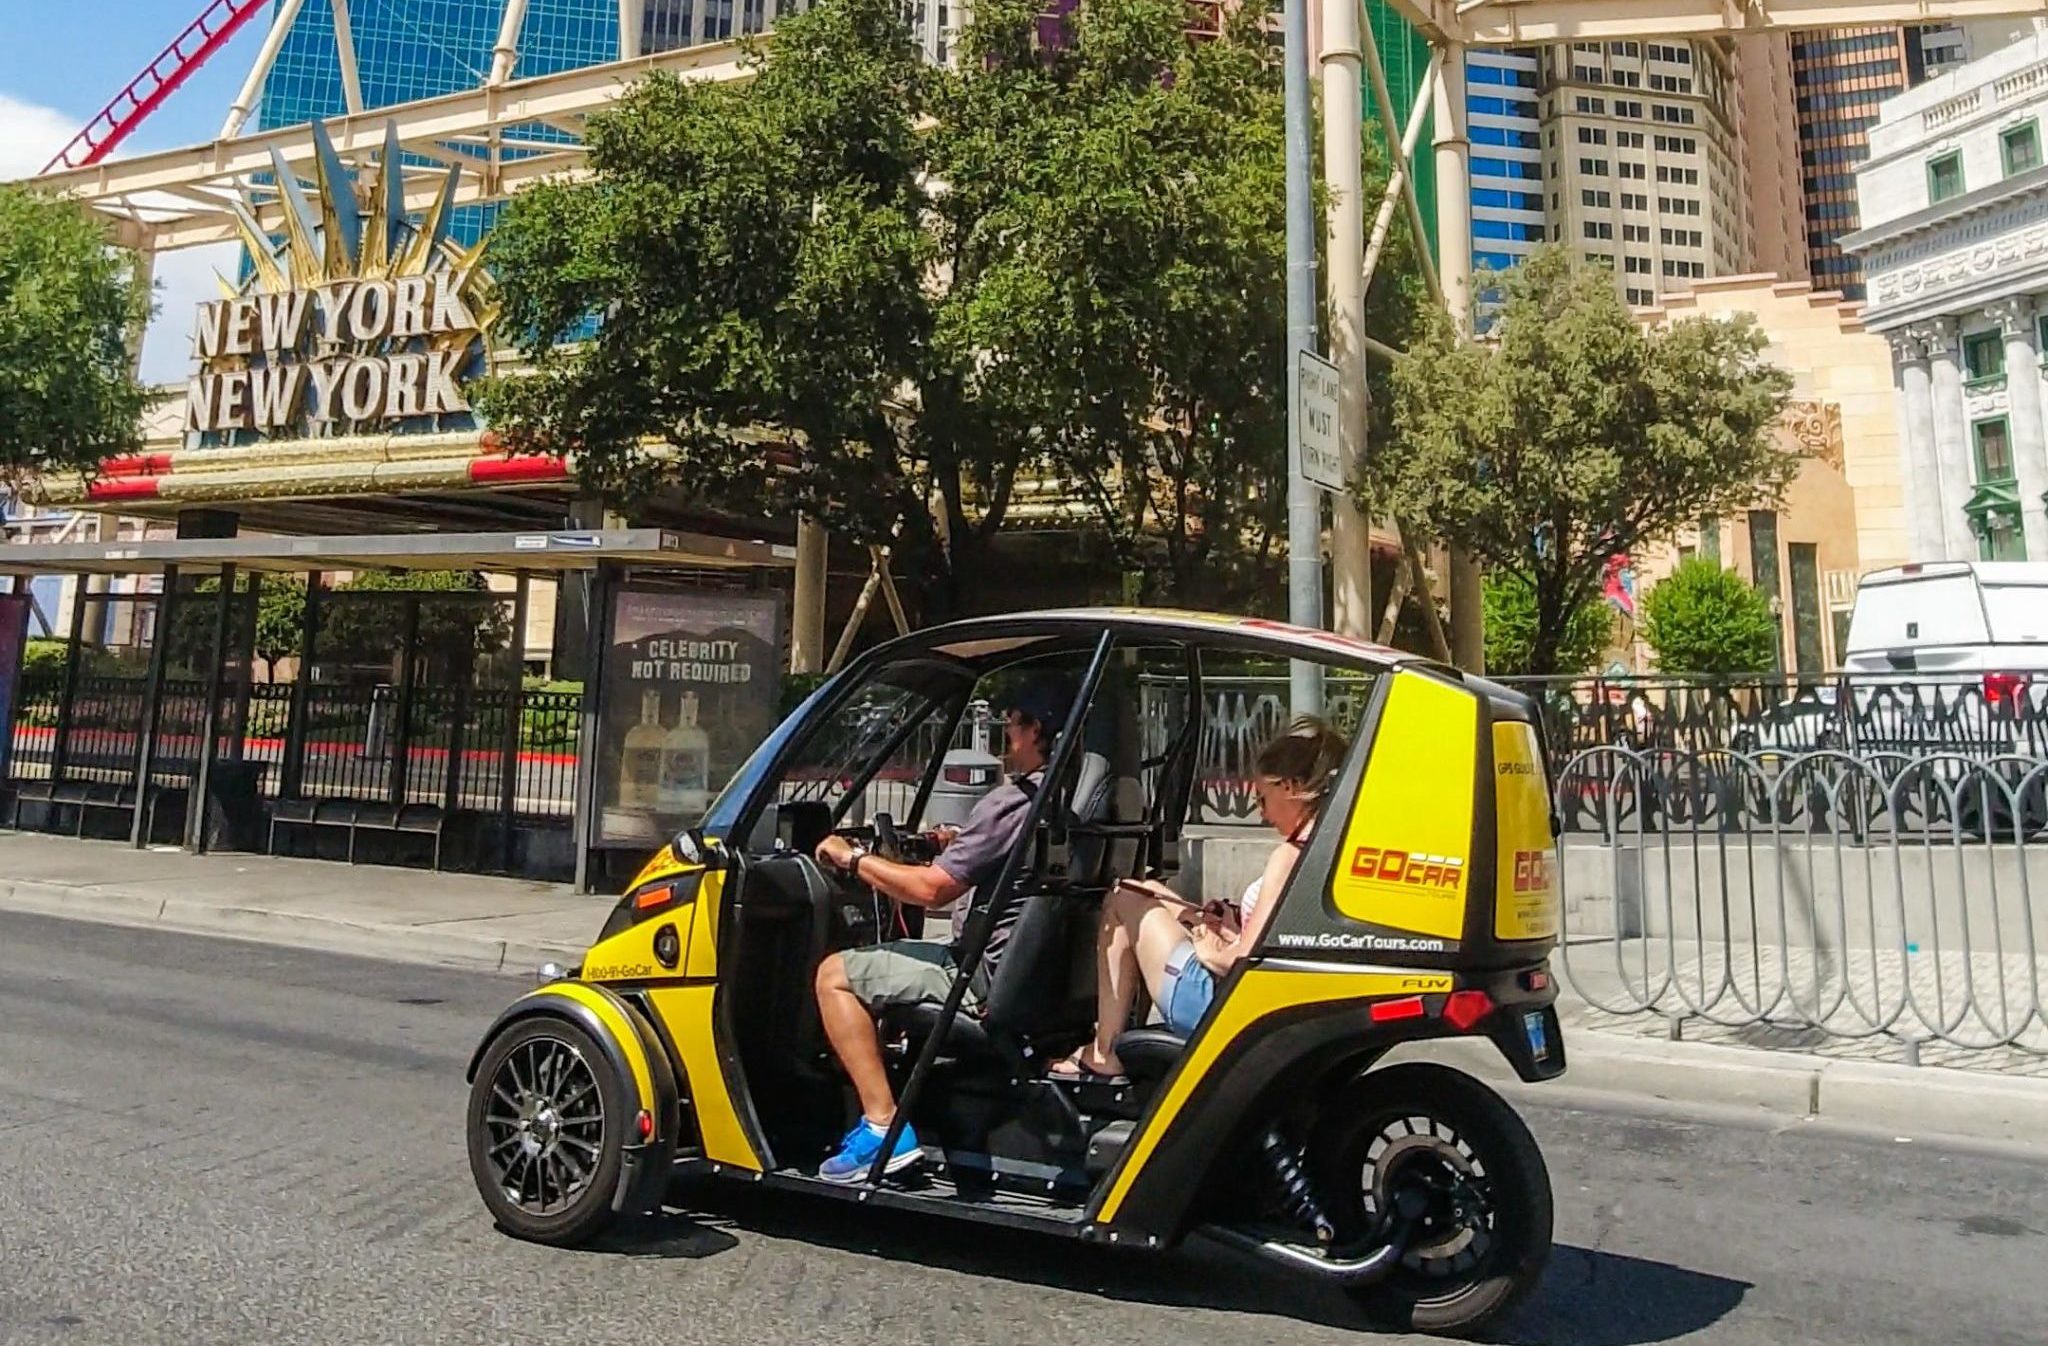 10 Fun Facts about the History of Las Vegas - GoCar Tours